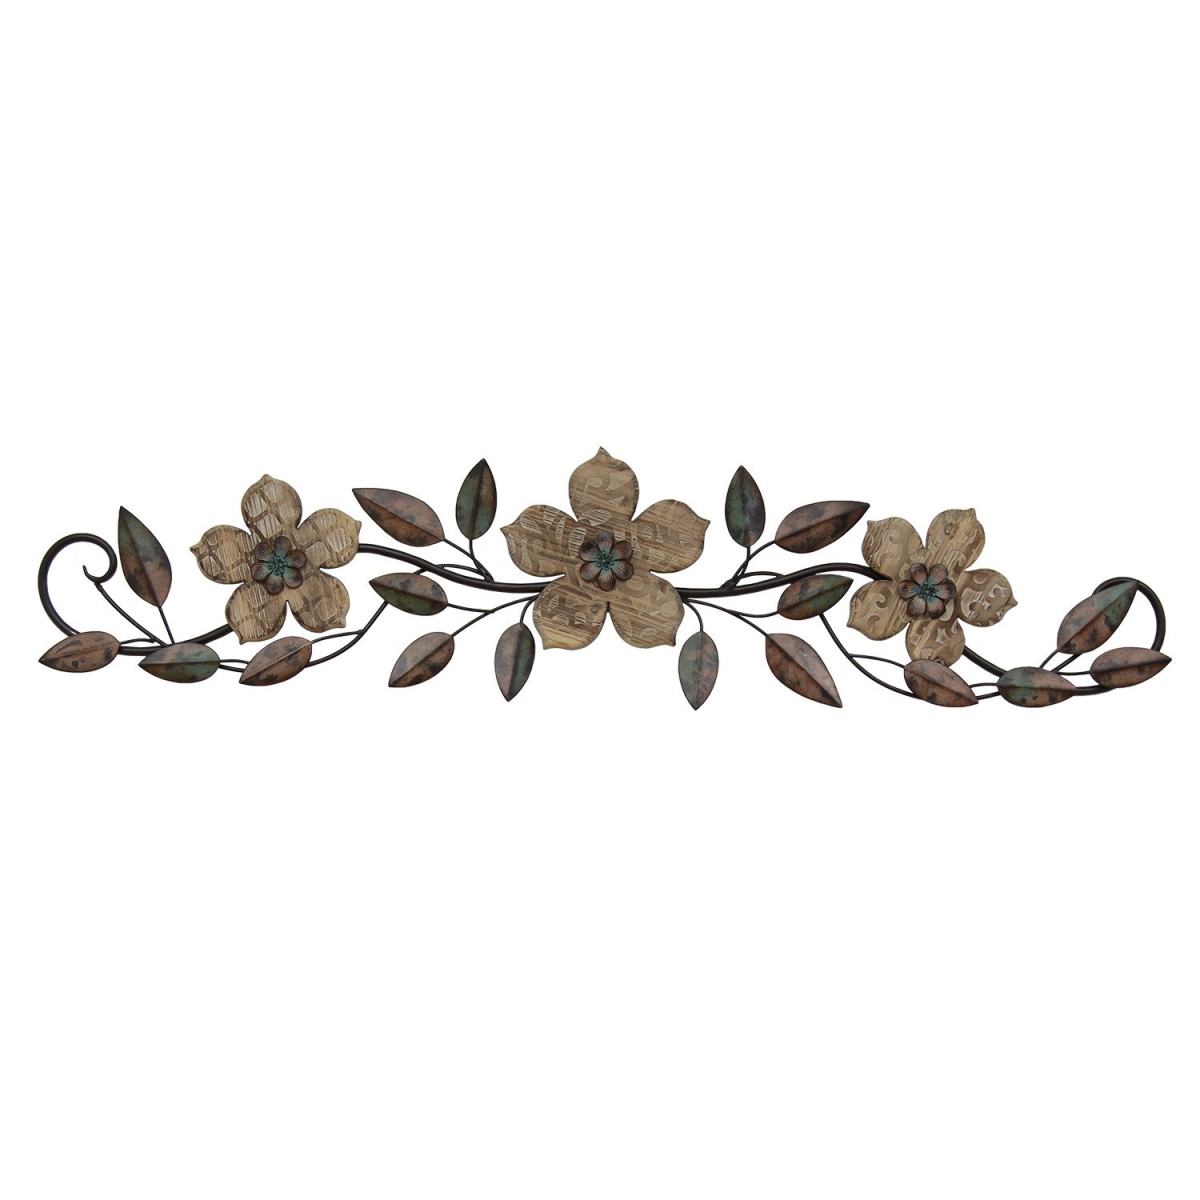 Home Roots 321060 Floral Patterned Wood Over The Door Wall Decor, Multicolor